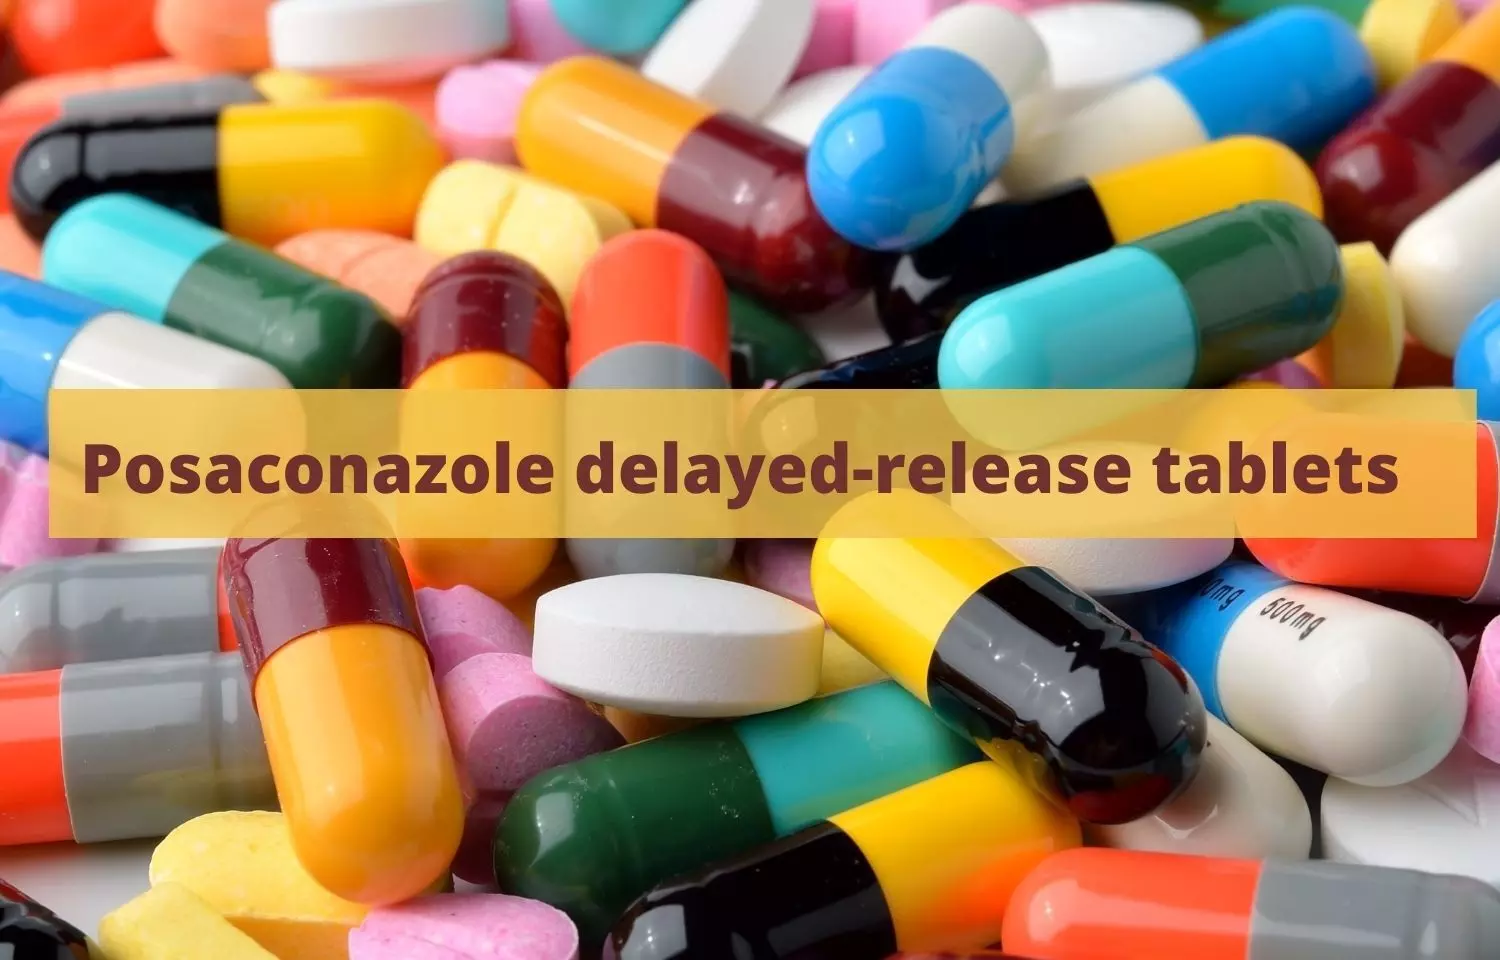 Dr Reddys unveils Posaconazole delayed-release tablets in US